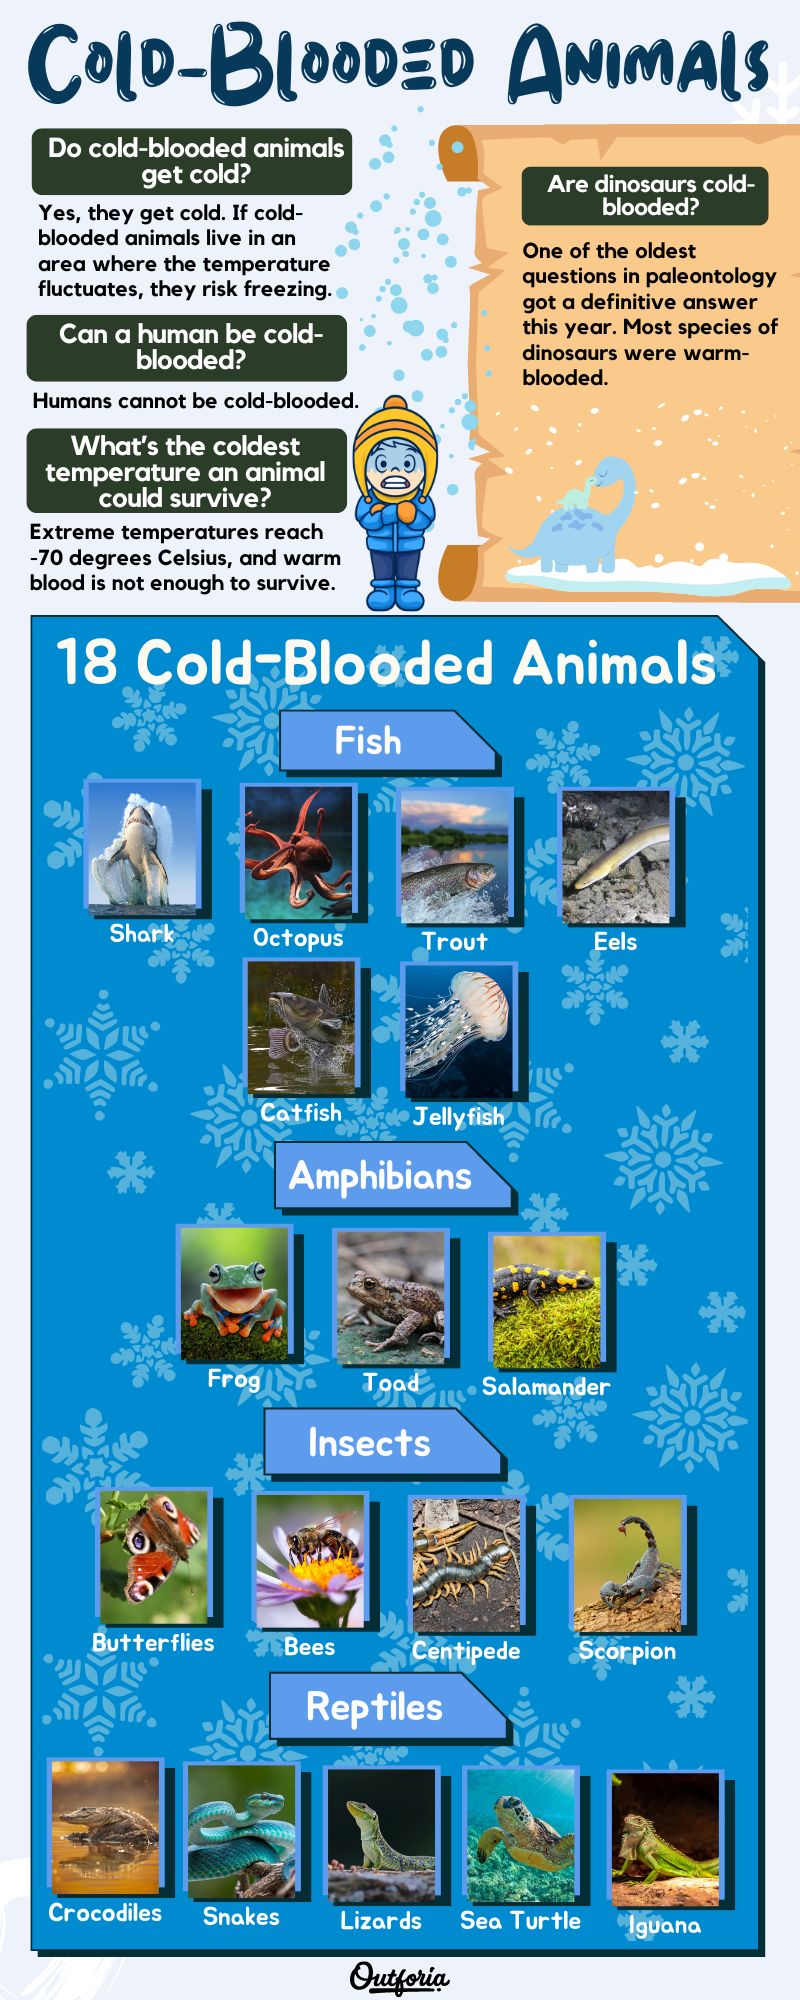 Chart of the cold blooded animals complete with facts, photos, and more